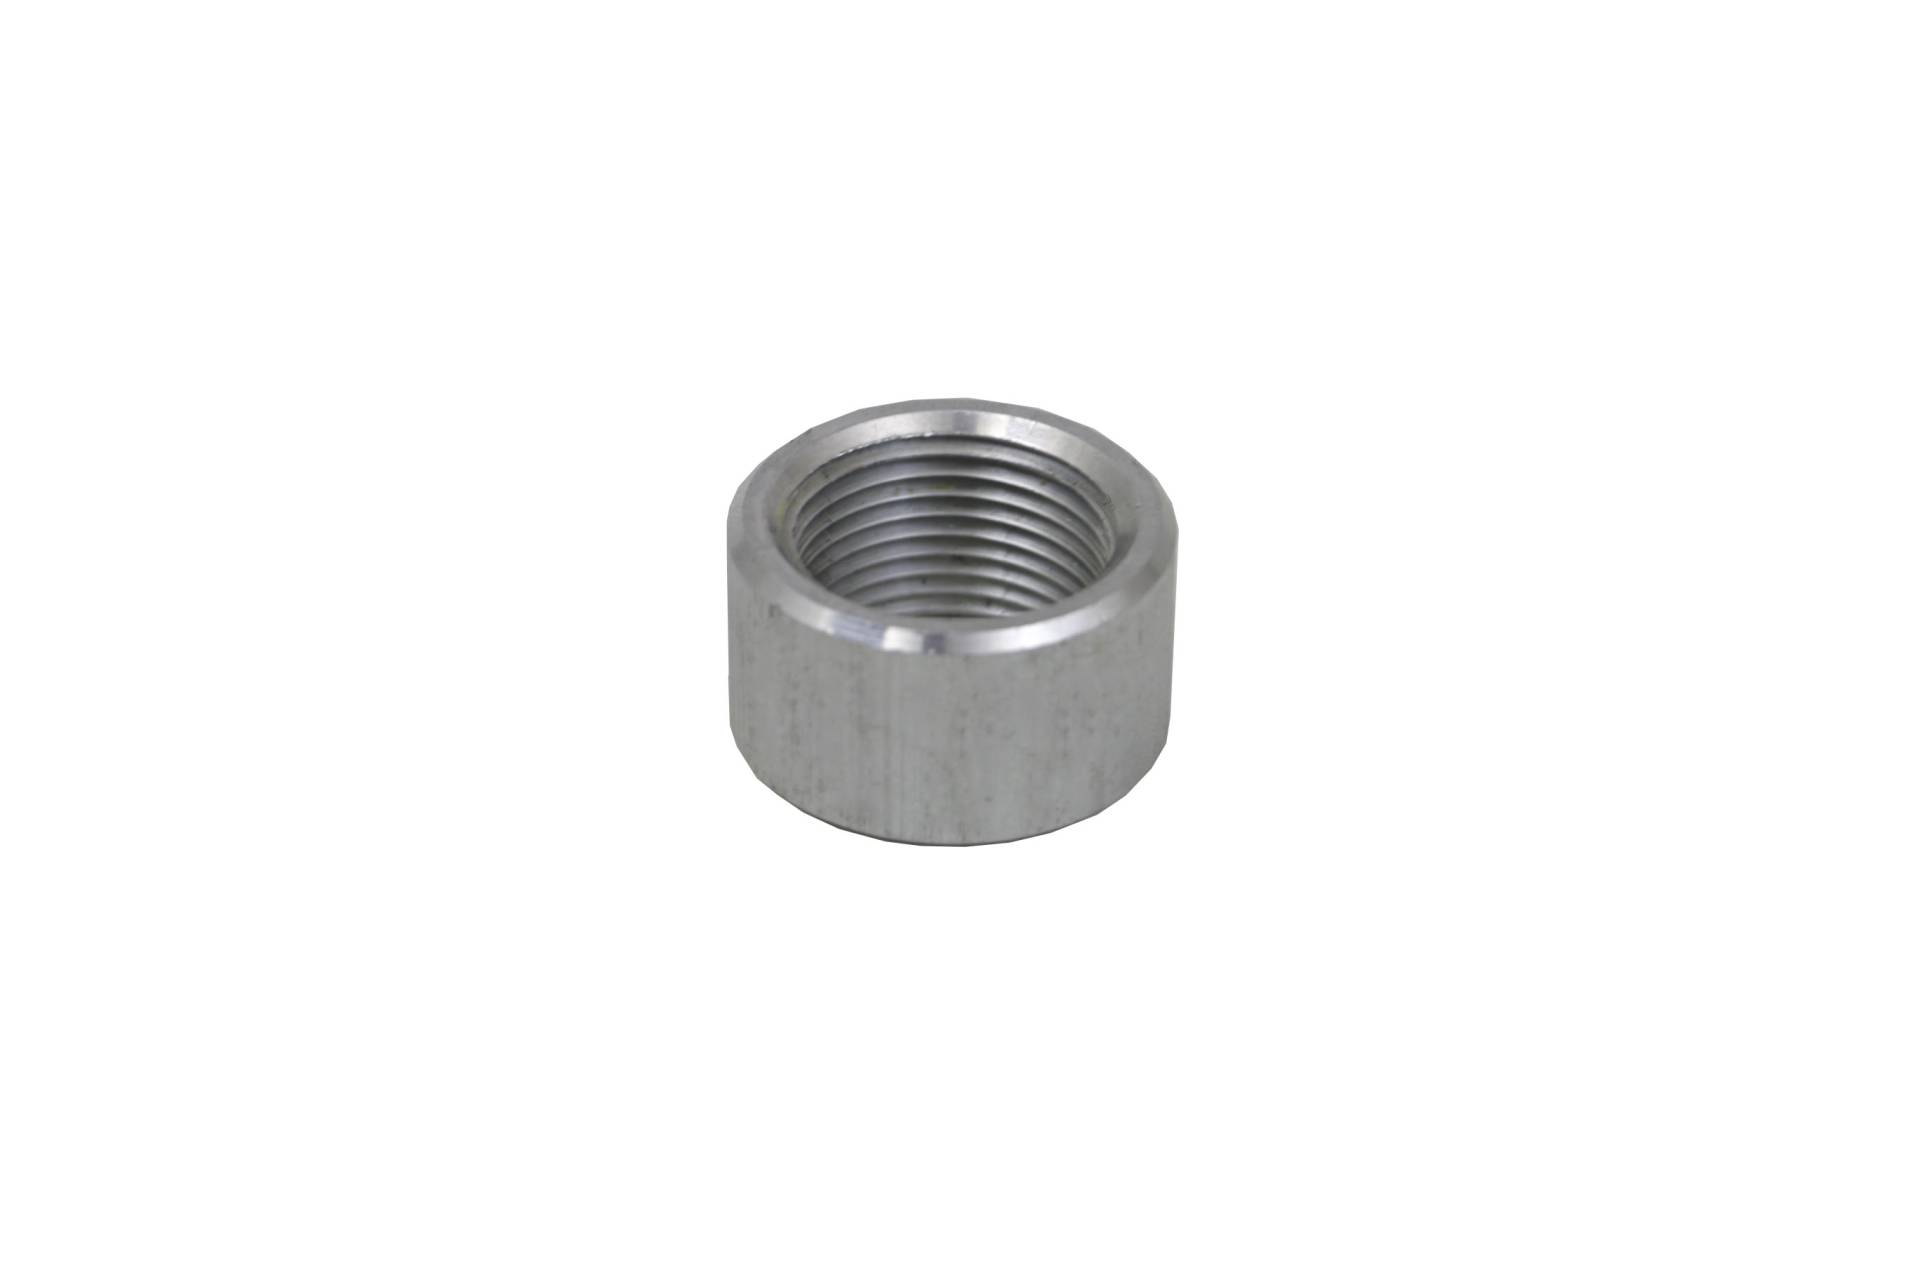 Wizard Cooling Inc - Weldable Pipe Thread Bungs 3/8" NPT Bung